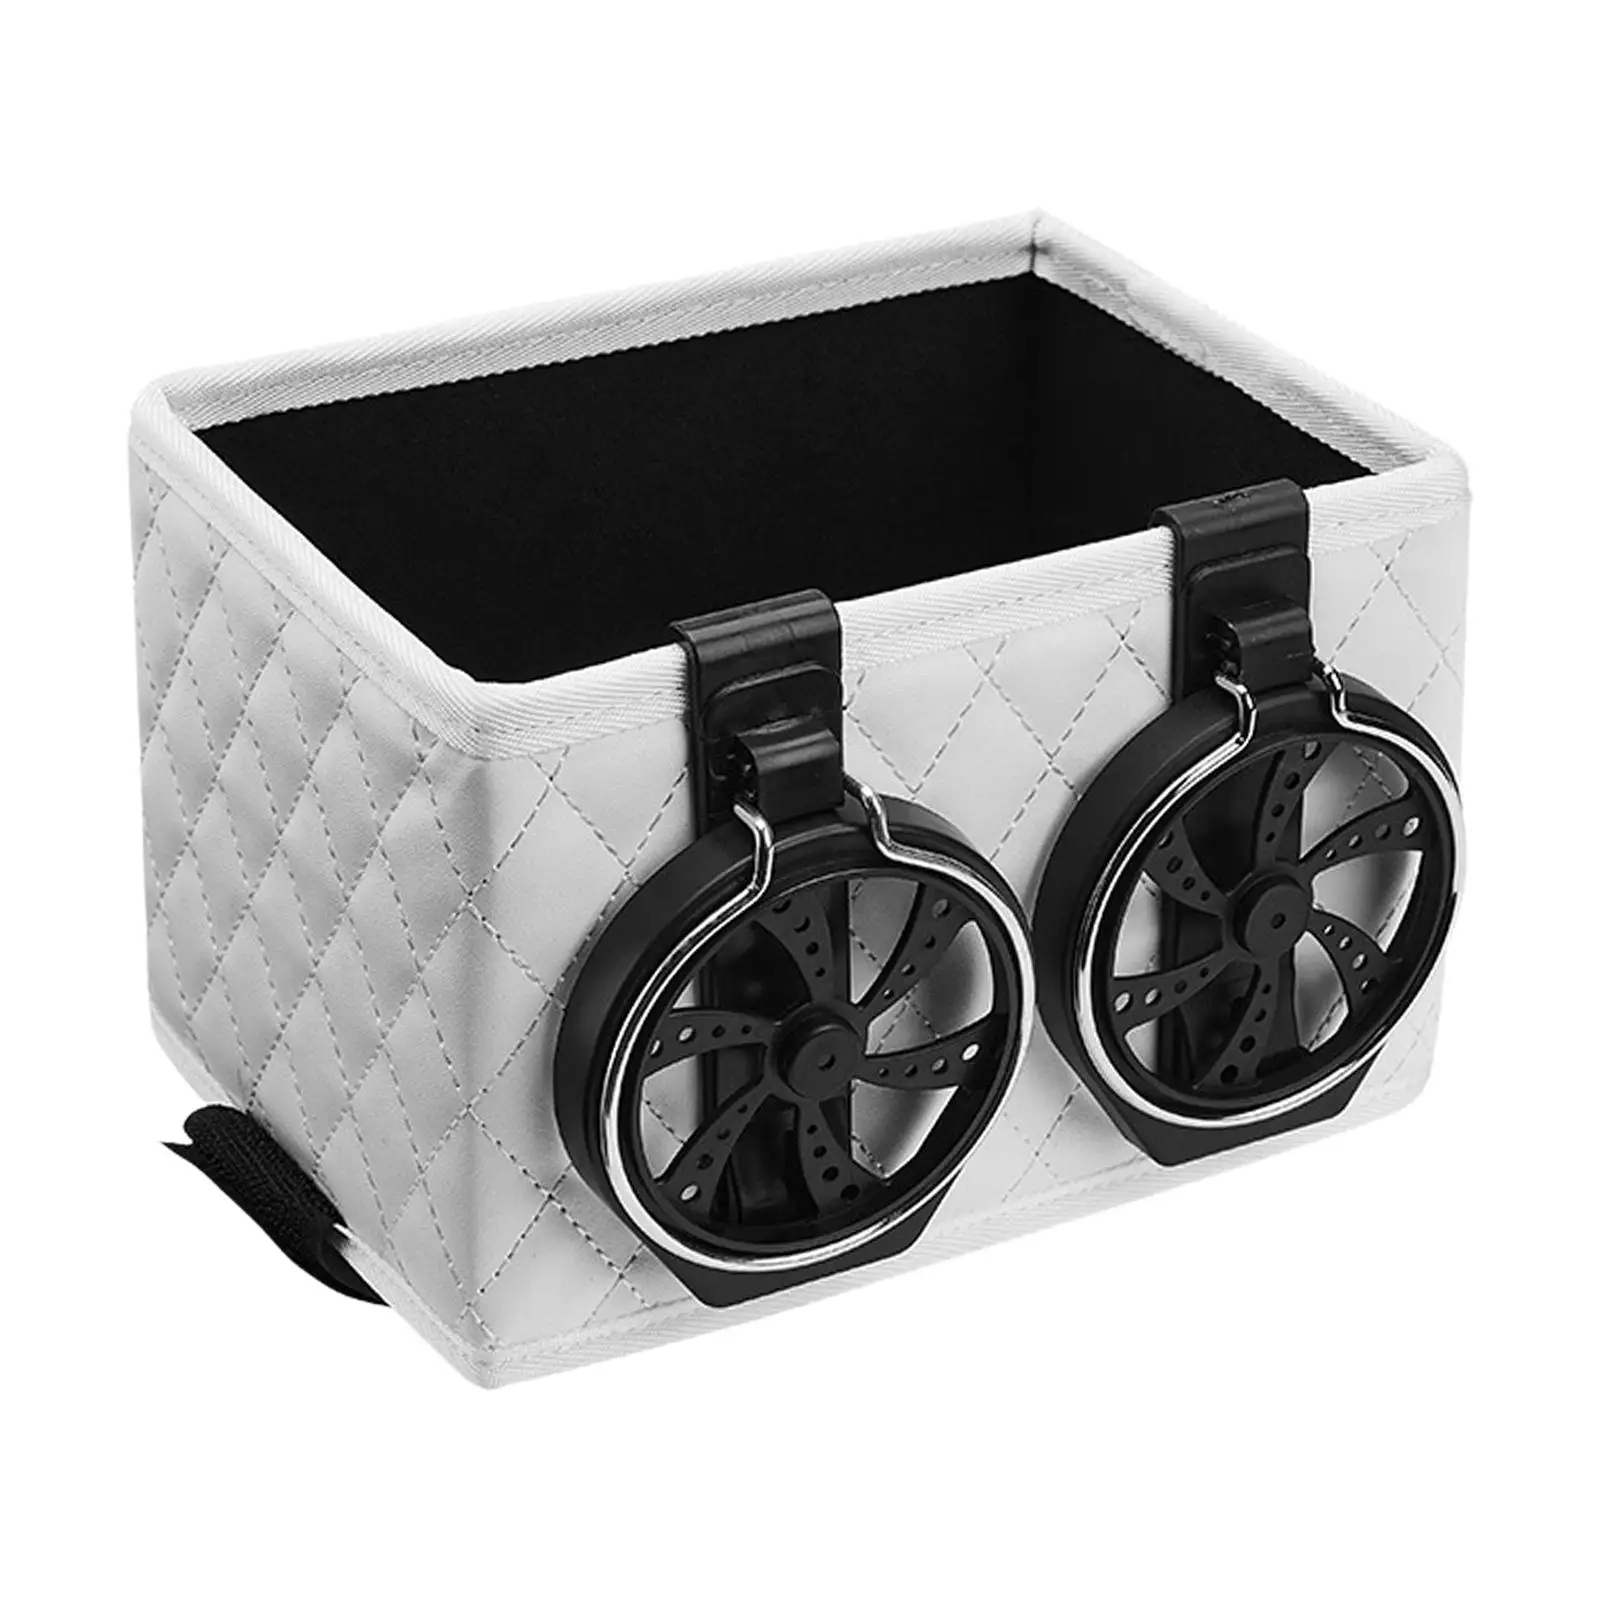 Water Cup Holder Foldable Car Storage Box Storage Rack for Water Cup